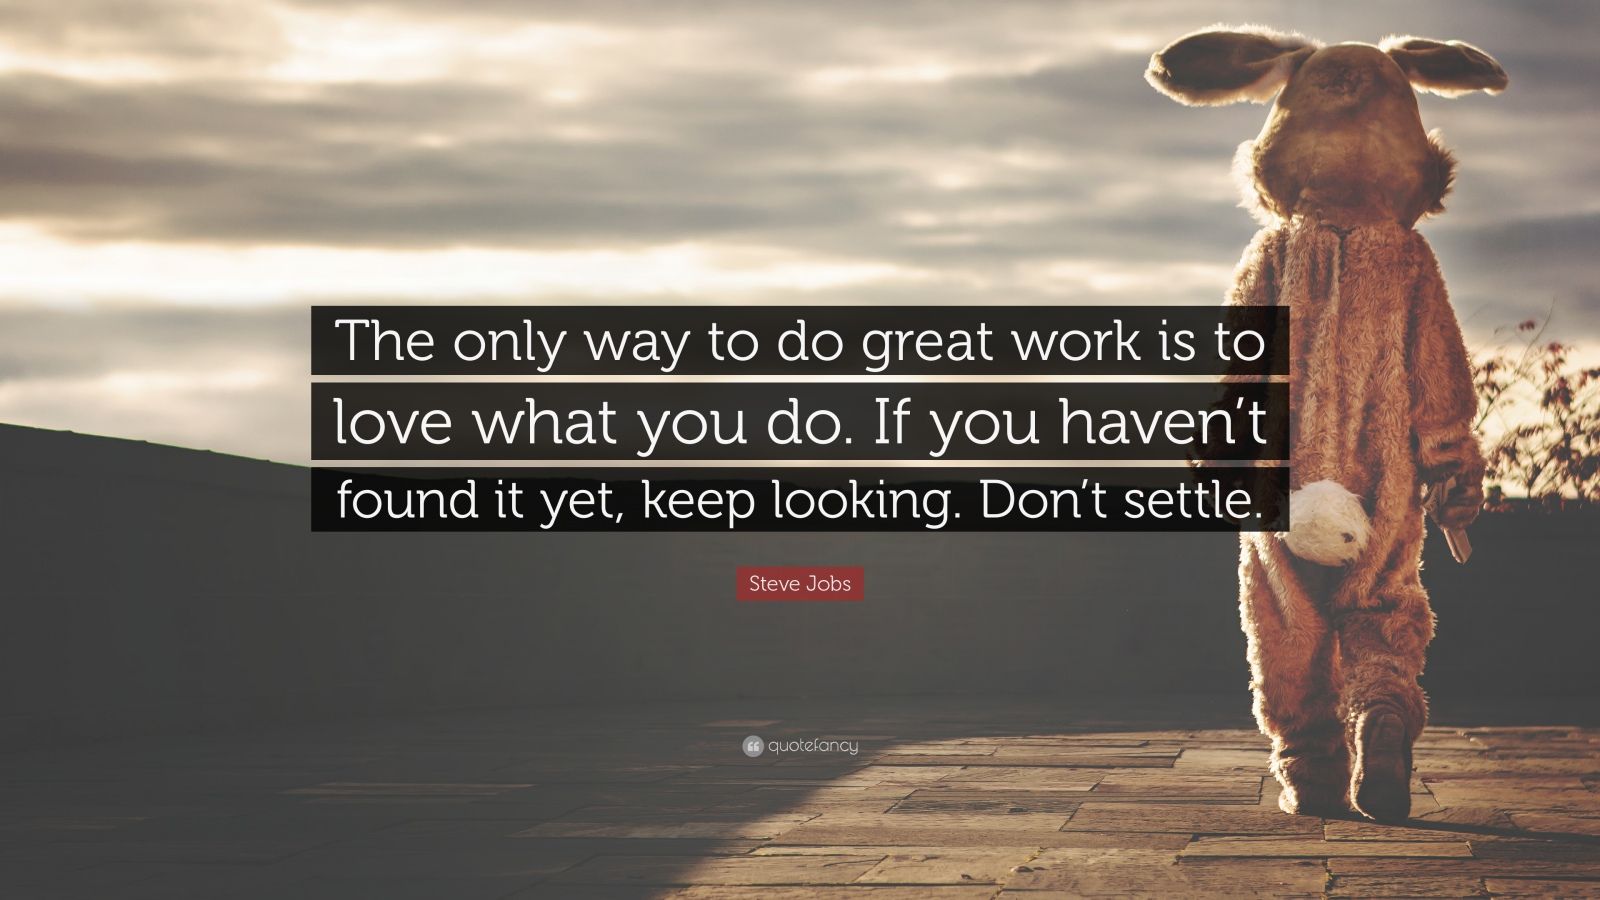 Steve Jobs Quote: “The only way to do great work is to love what you do